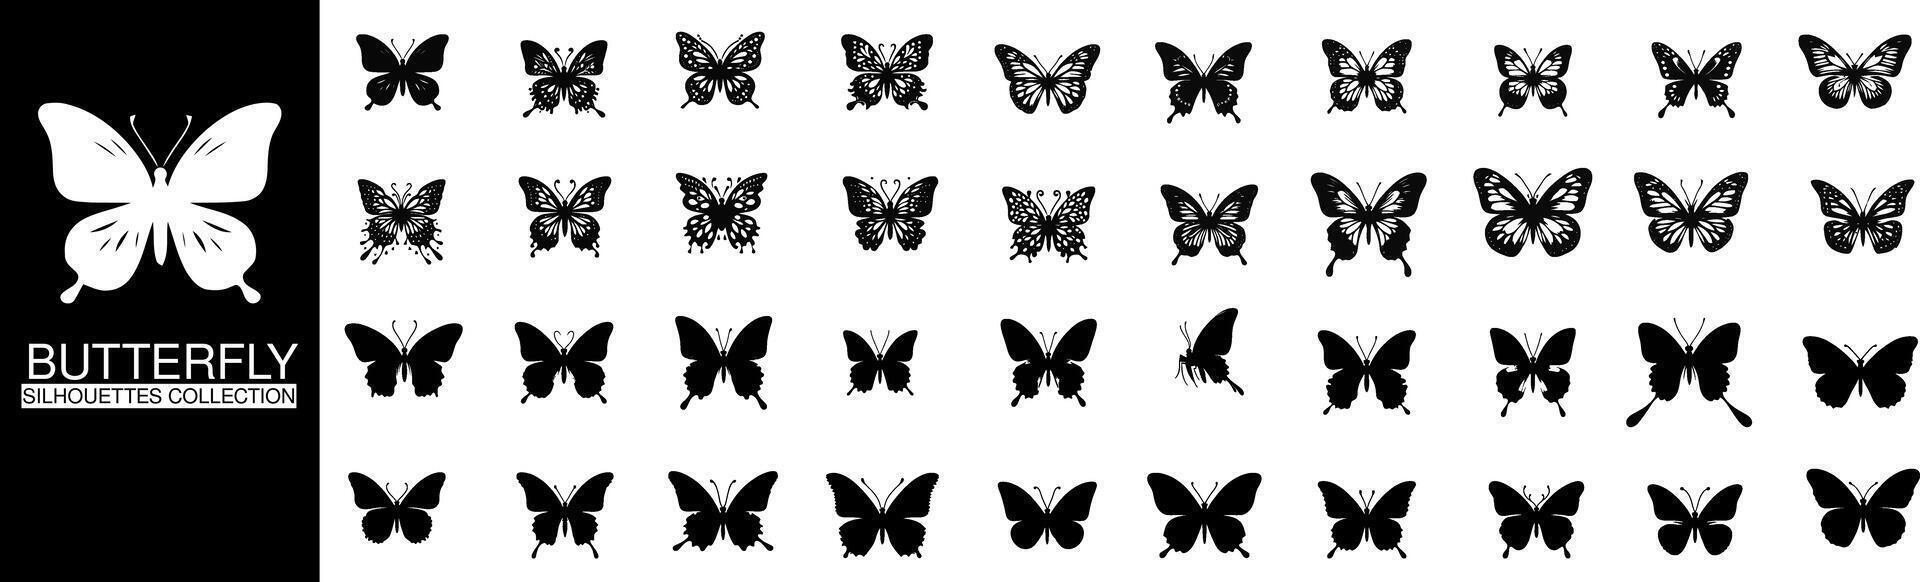 butterfly silhouette collection, showcasing the delicate beauty of various species in minimalist designs vector